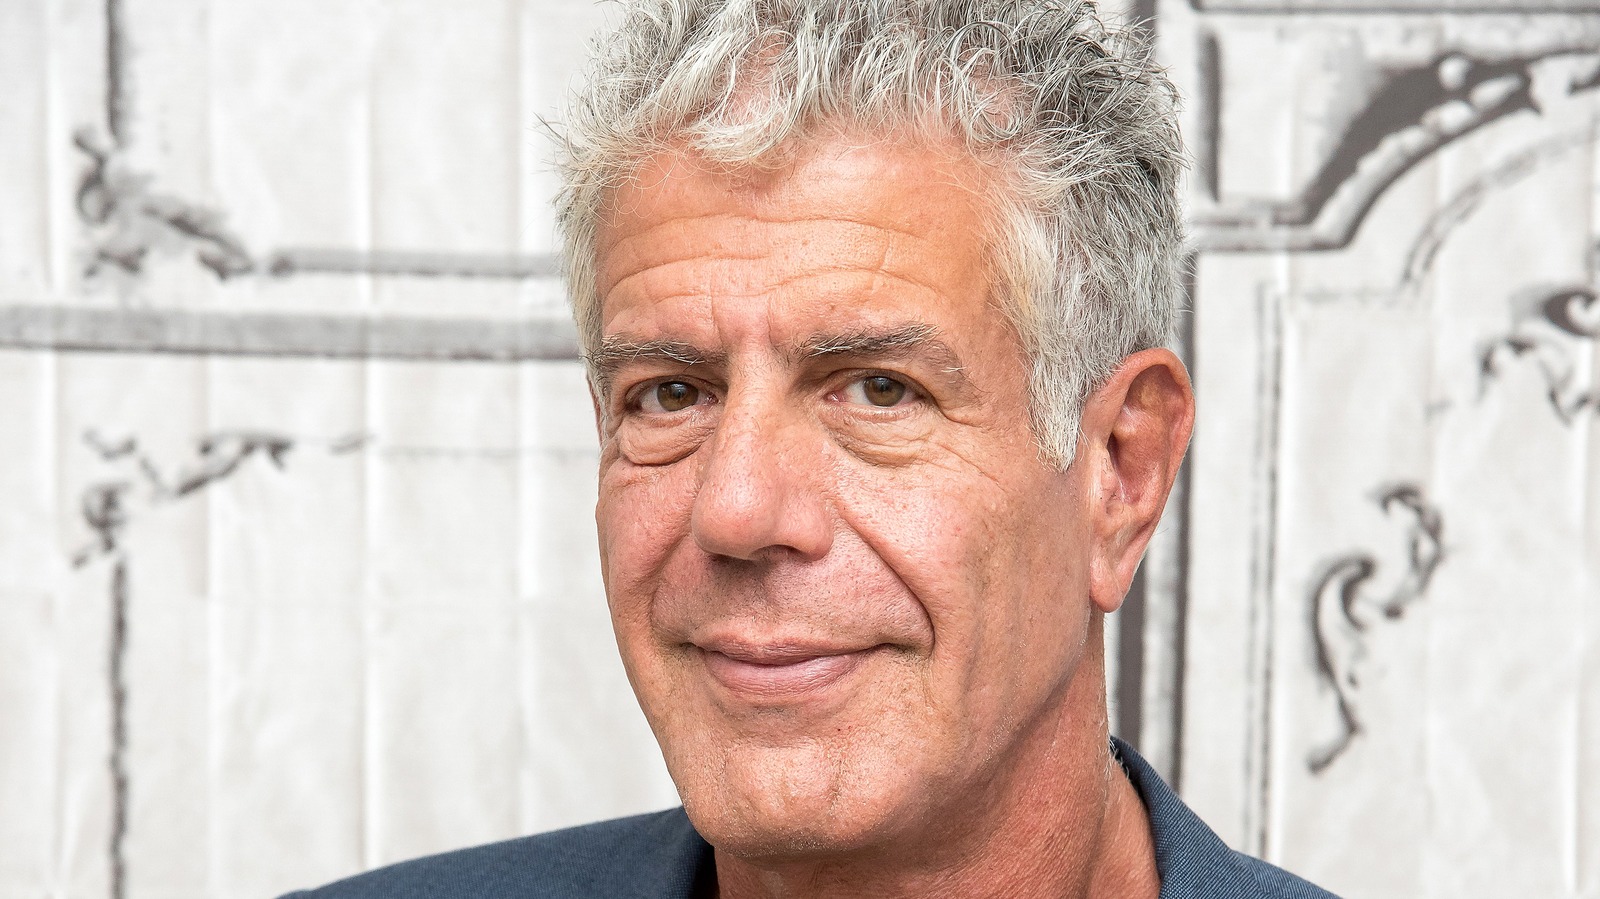 The Greens That Never Belong On Burgers, According To Anthony Bourdain – Tasting Table